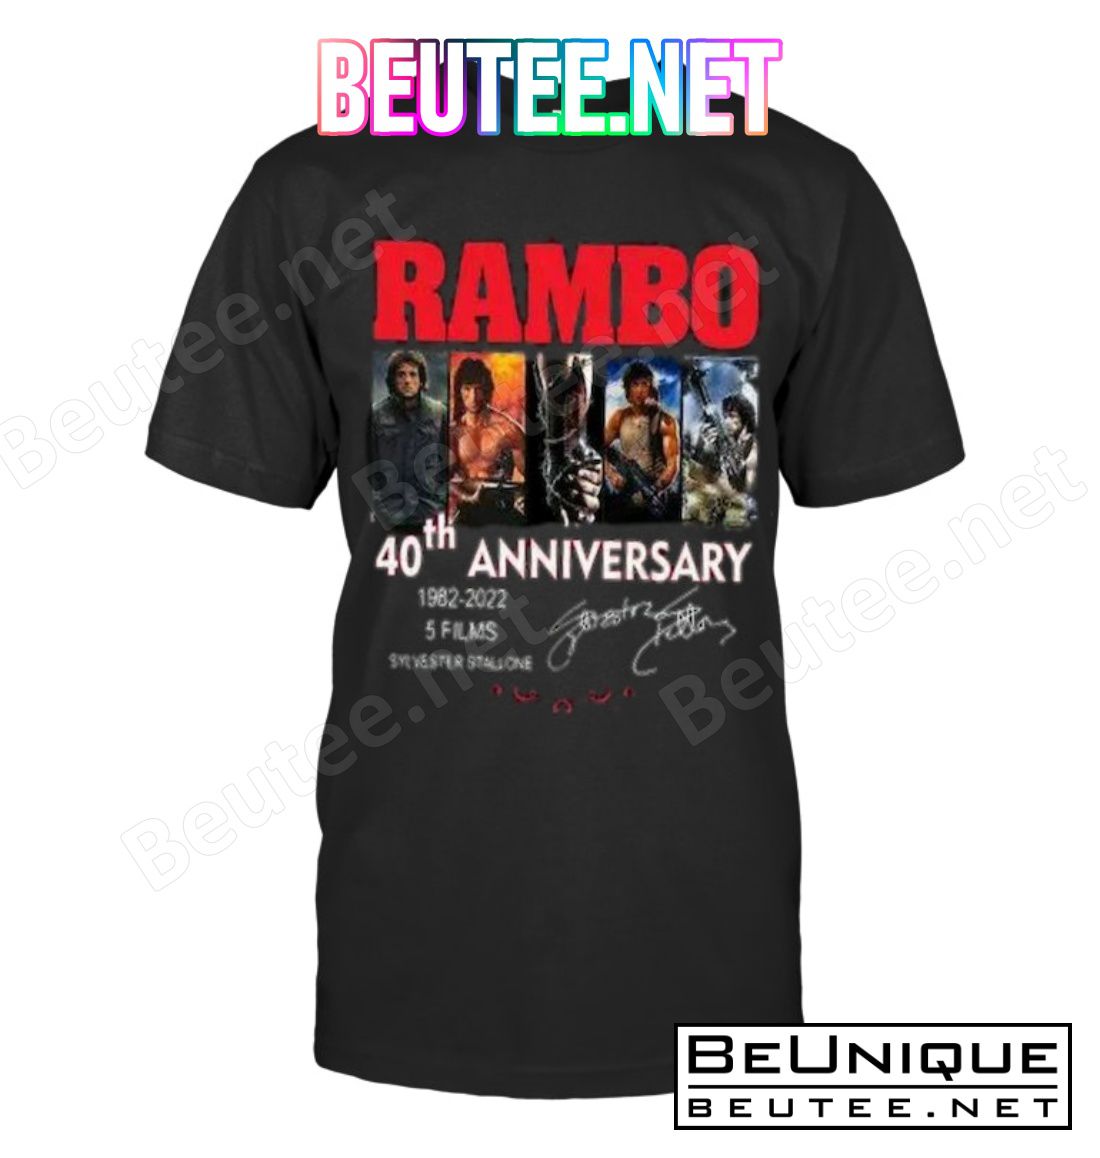 Rambo 40th Anniversary 1982 2022 5 Films Sylvester Stallone Signatures